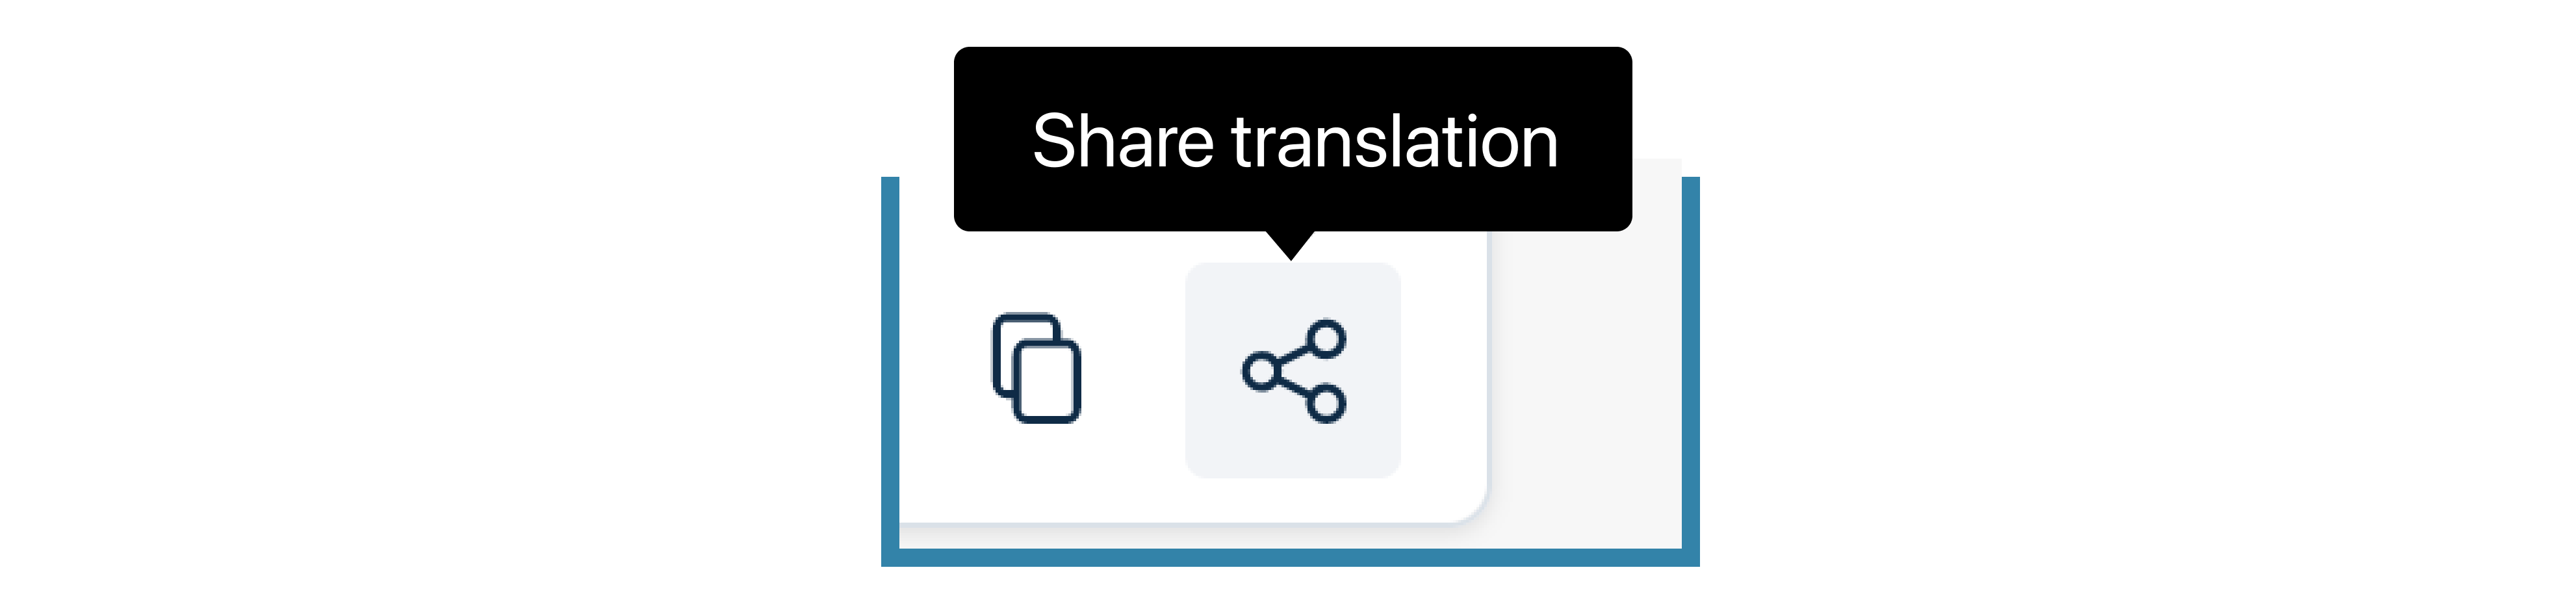 Illustration of improved Share Translation icon, with the words Share Translation populating above the icon.